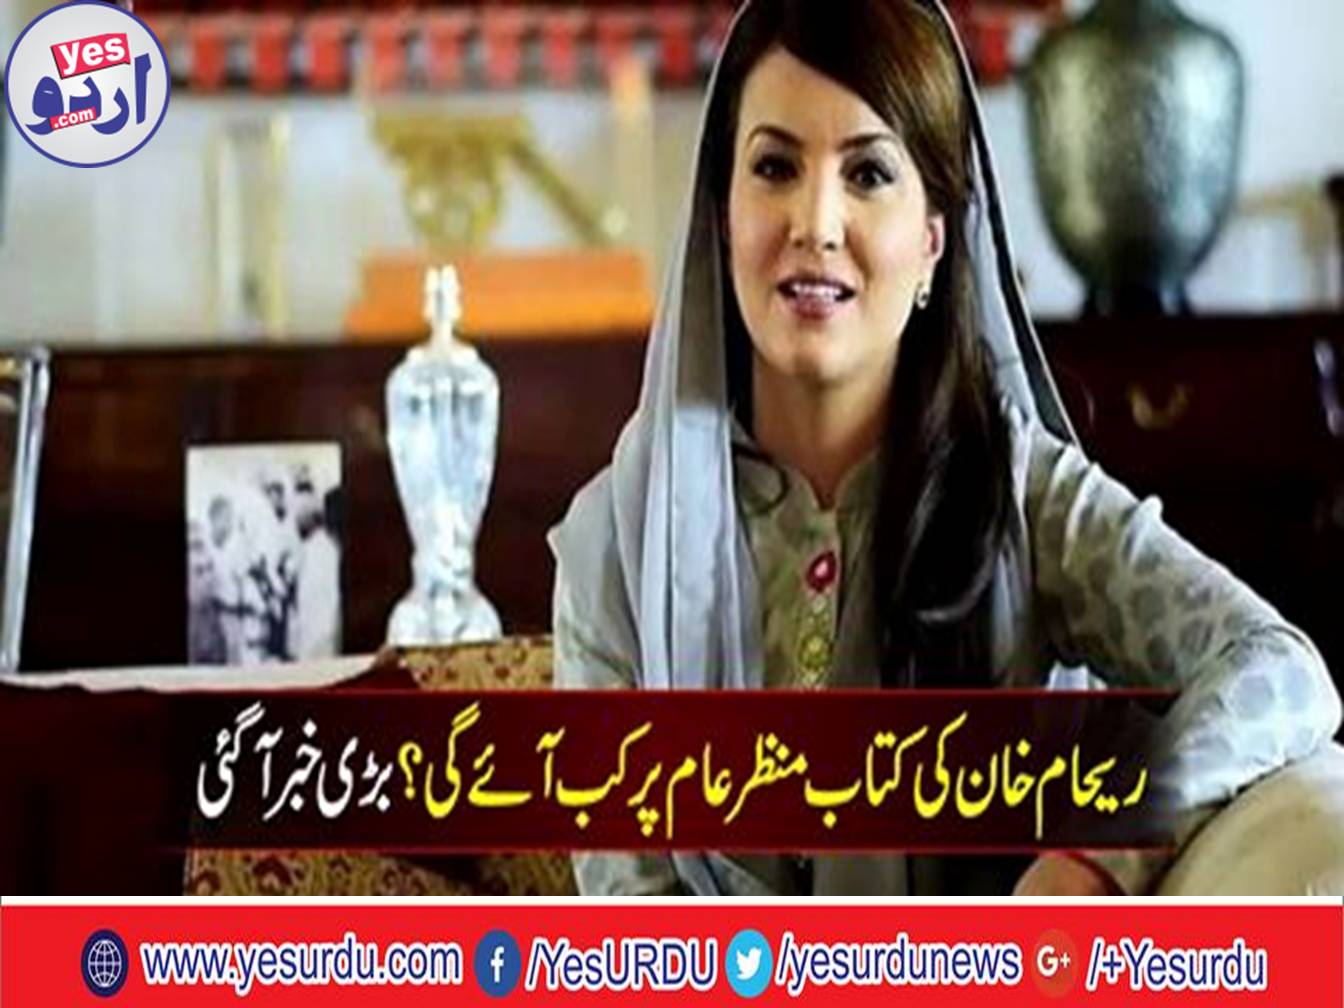 When will the book of Reham Khan come to screen?